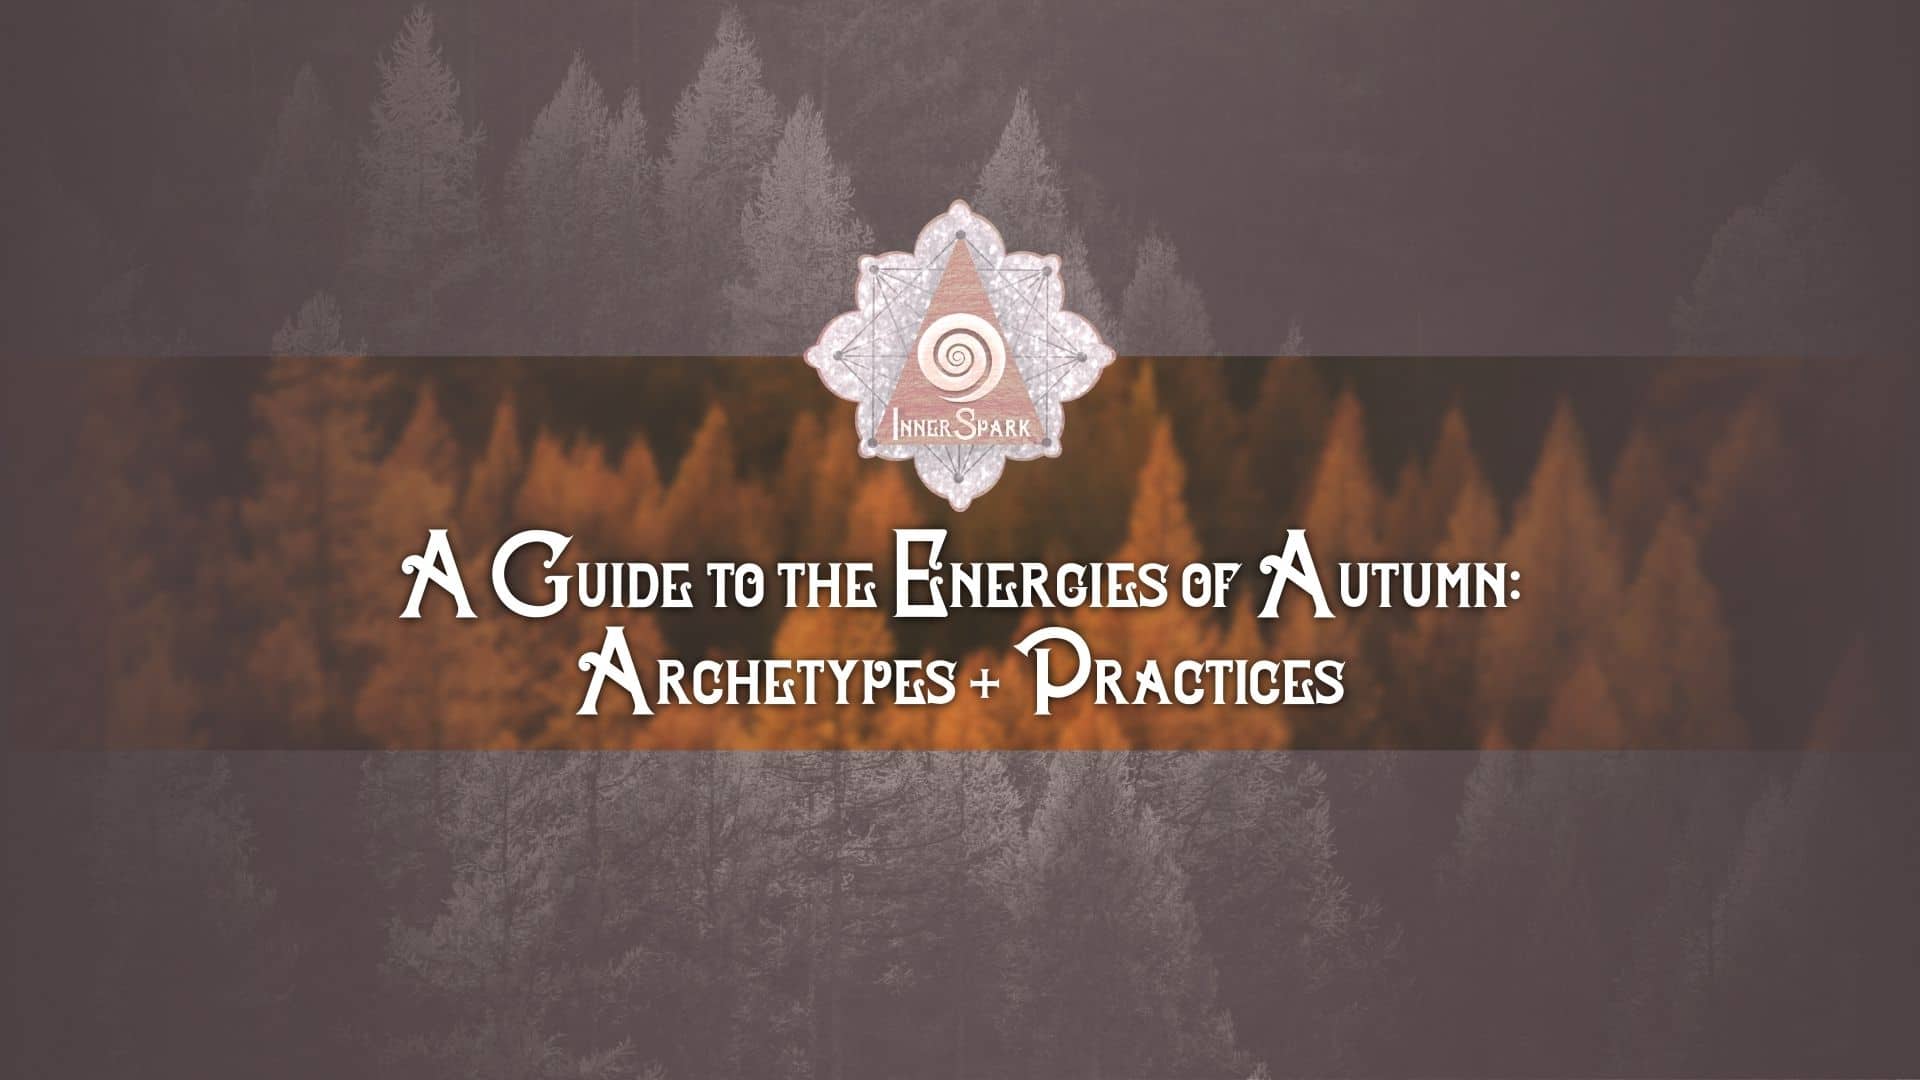 A Guide to the Energies of Autumn: Archetypes + Practices